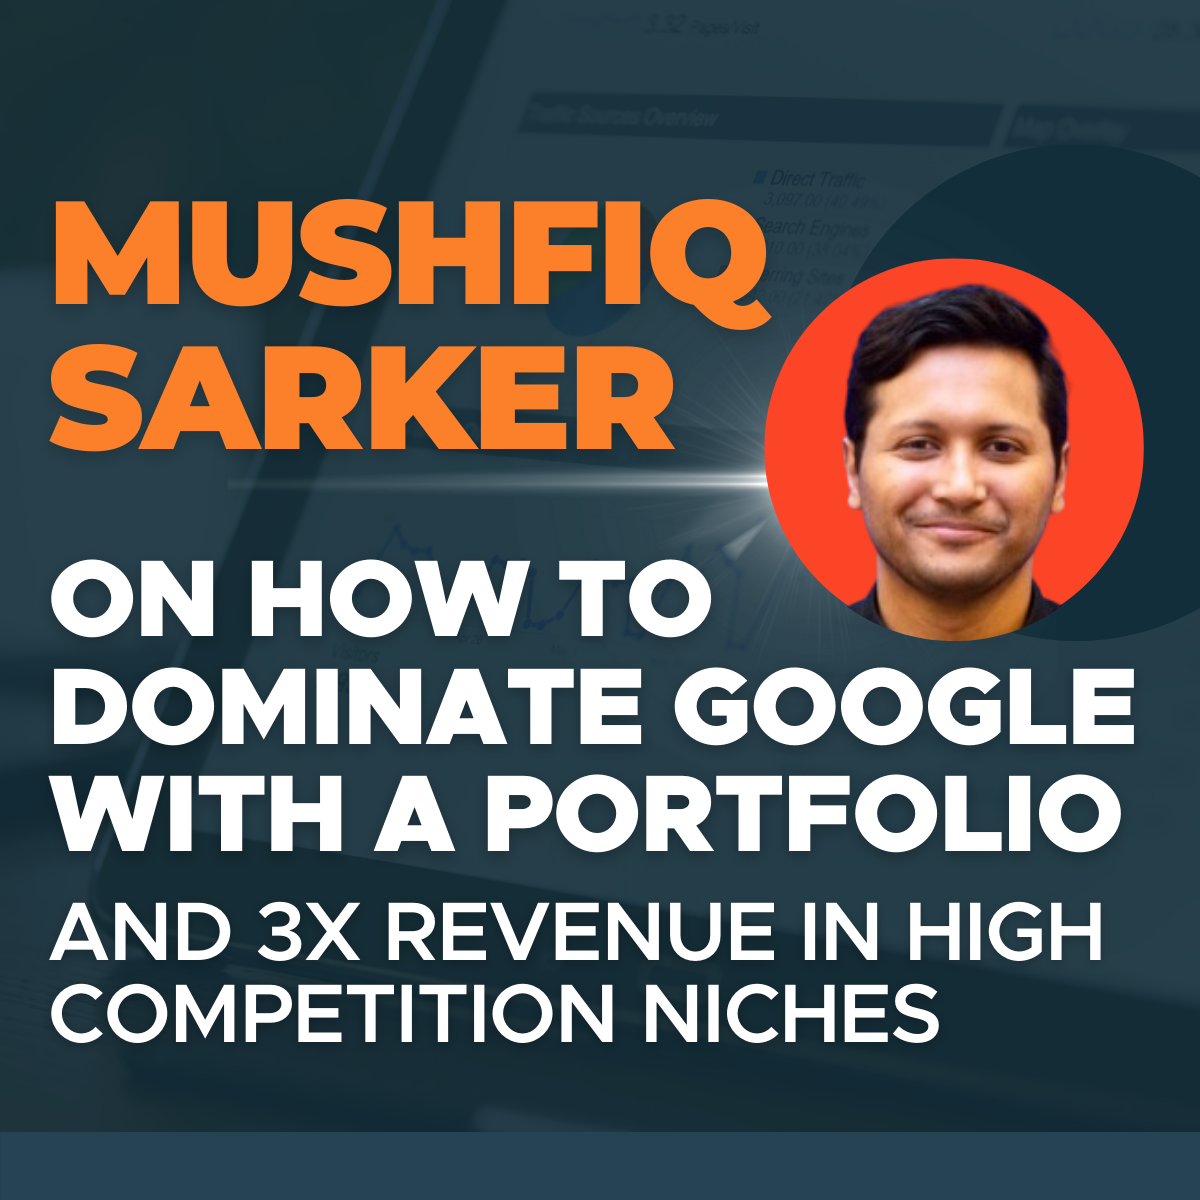 Mushfiq Sarker on how to dominate Google with a portfolio and 3x revenue in high competition niches